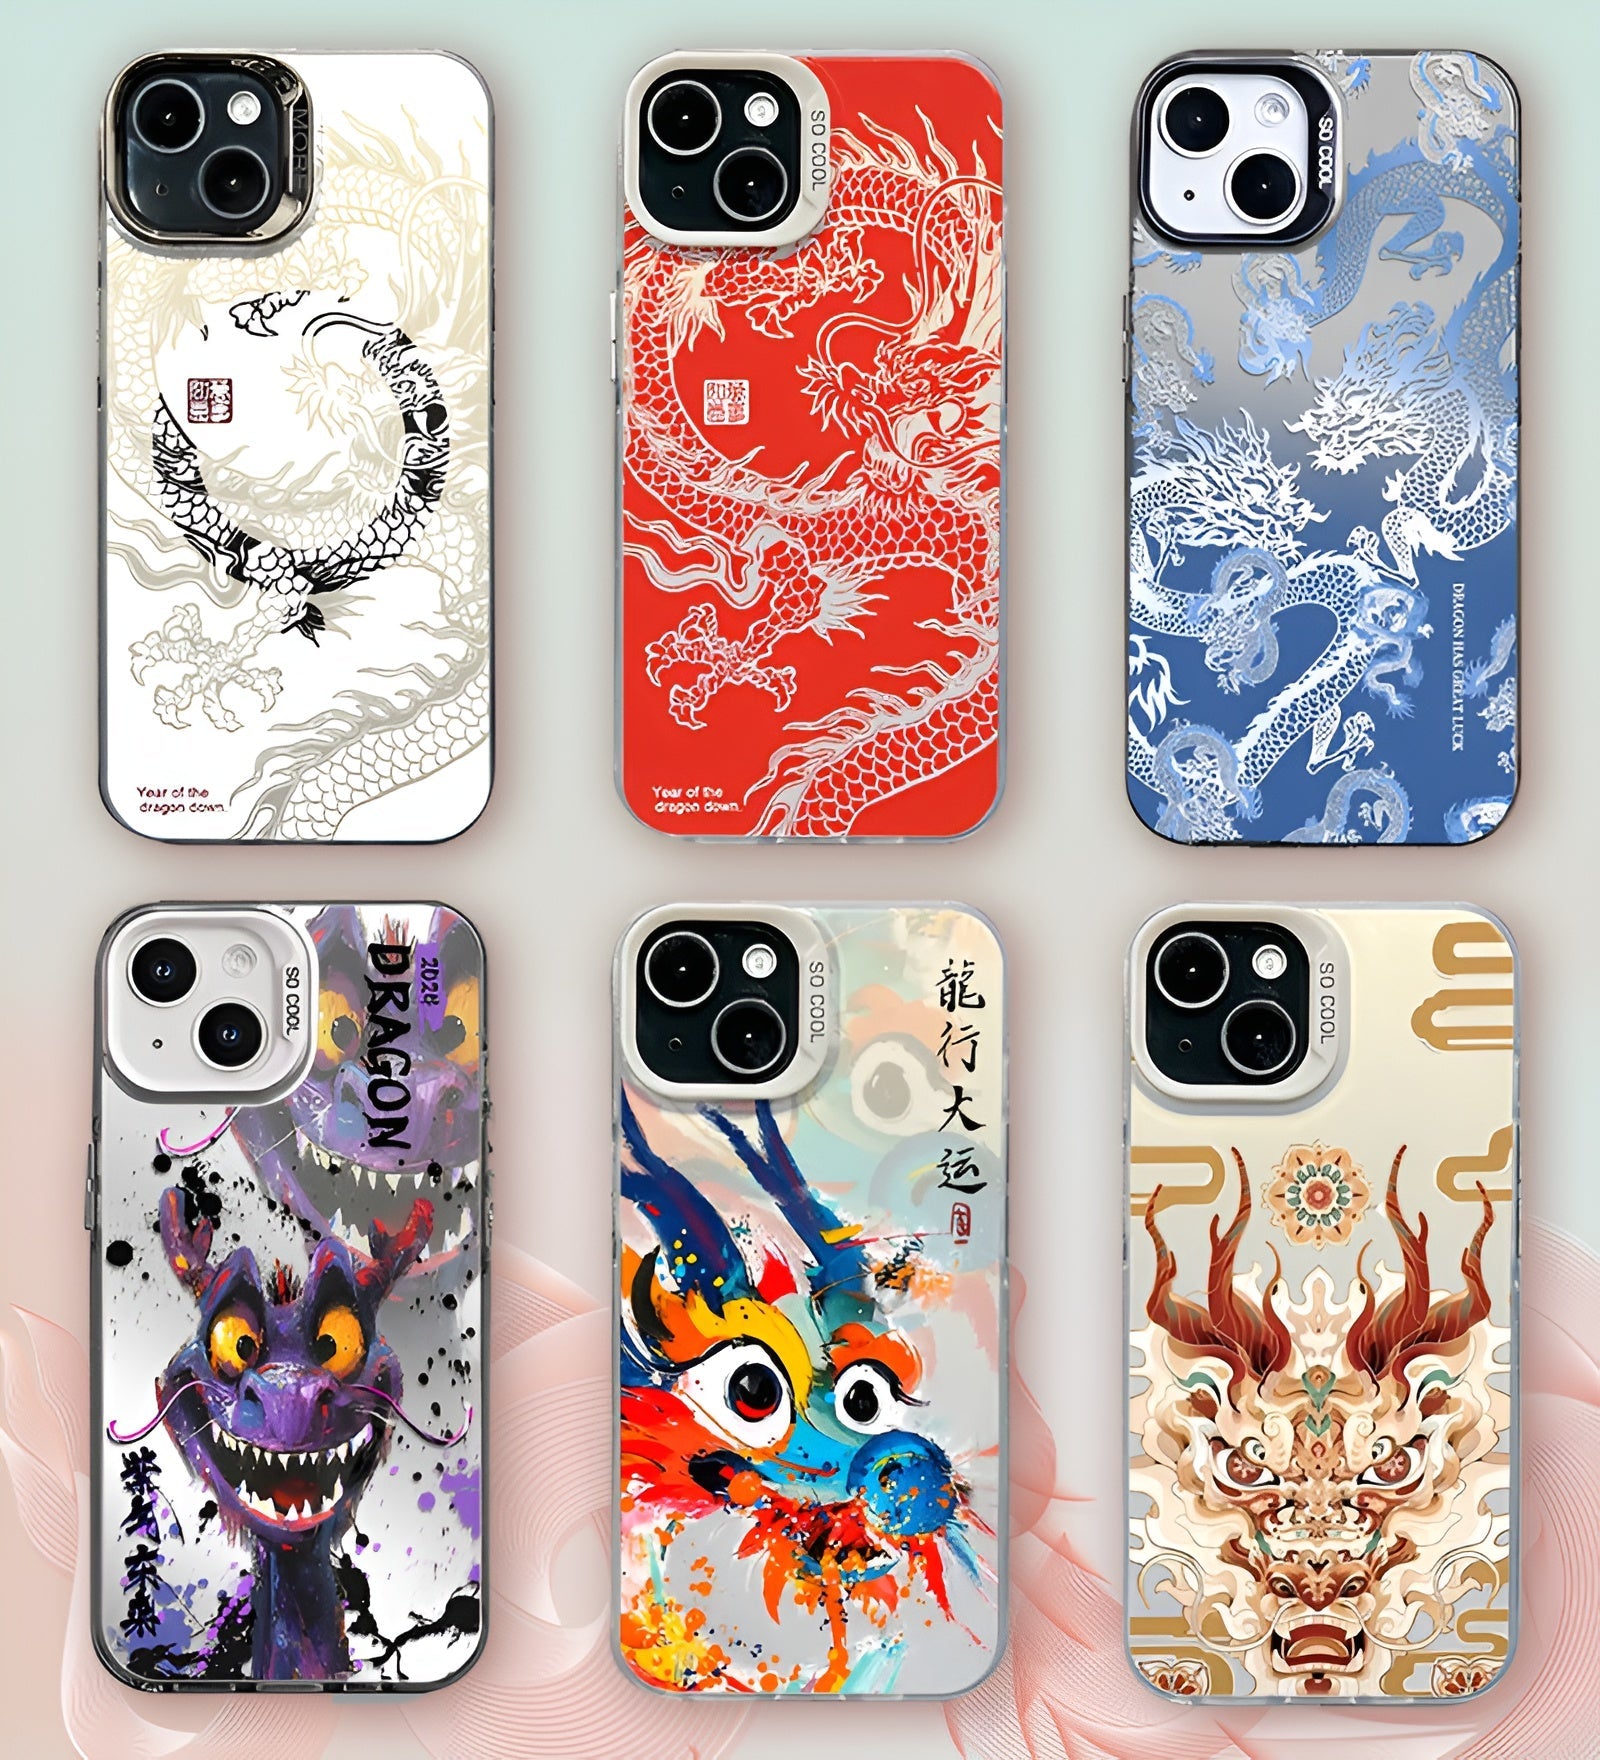 Year Of The Dragon iPhone Cases